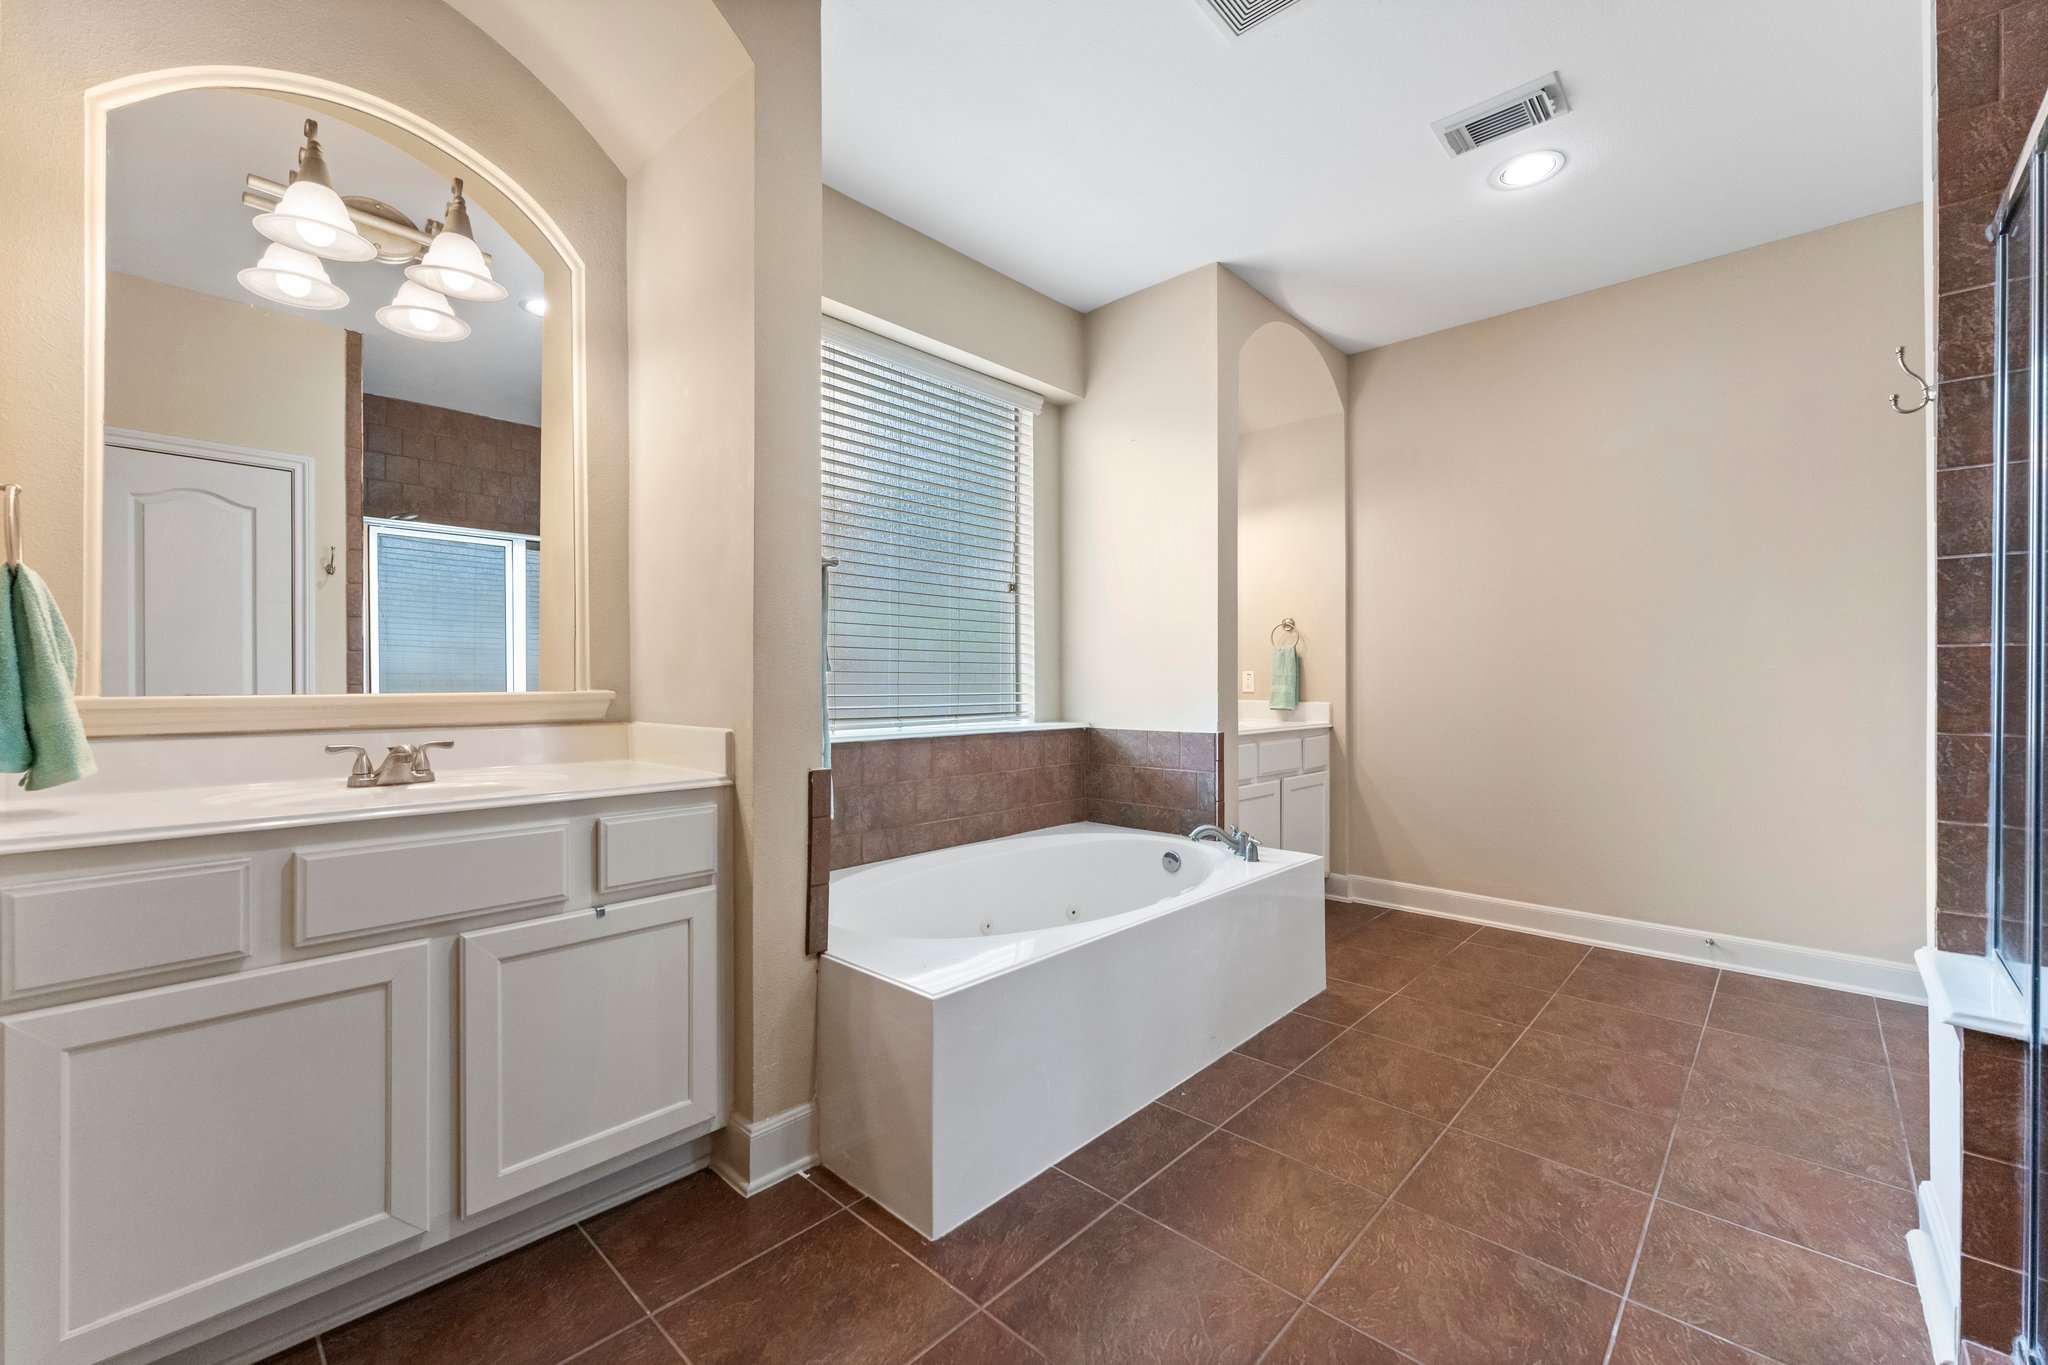 Primary bath includes walk-in shower with bench, jetted garden tub, and connected large walk-in closet.